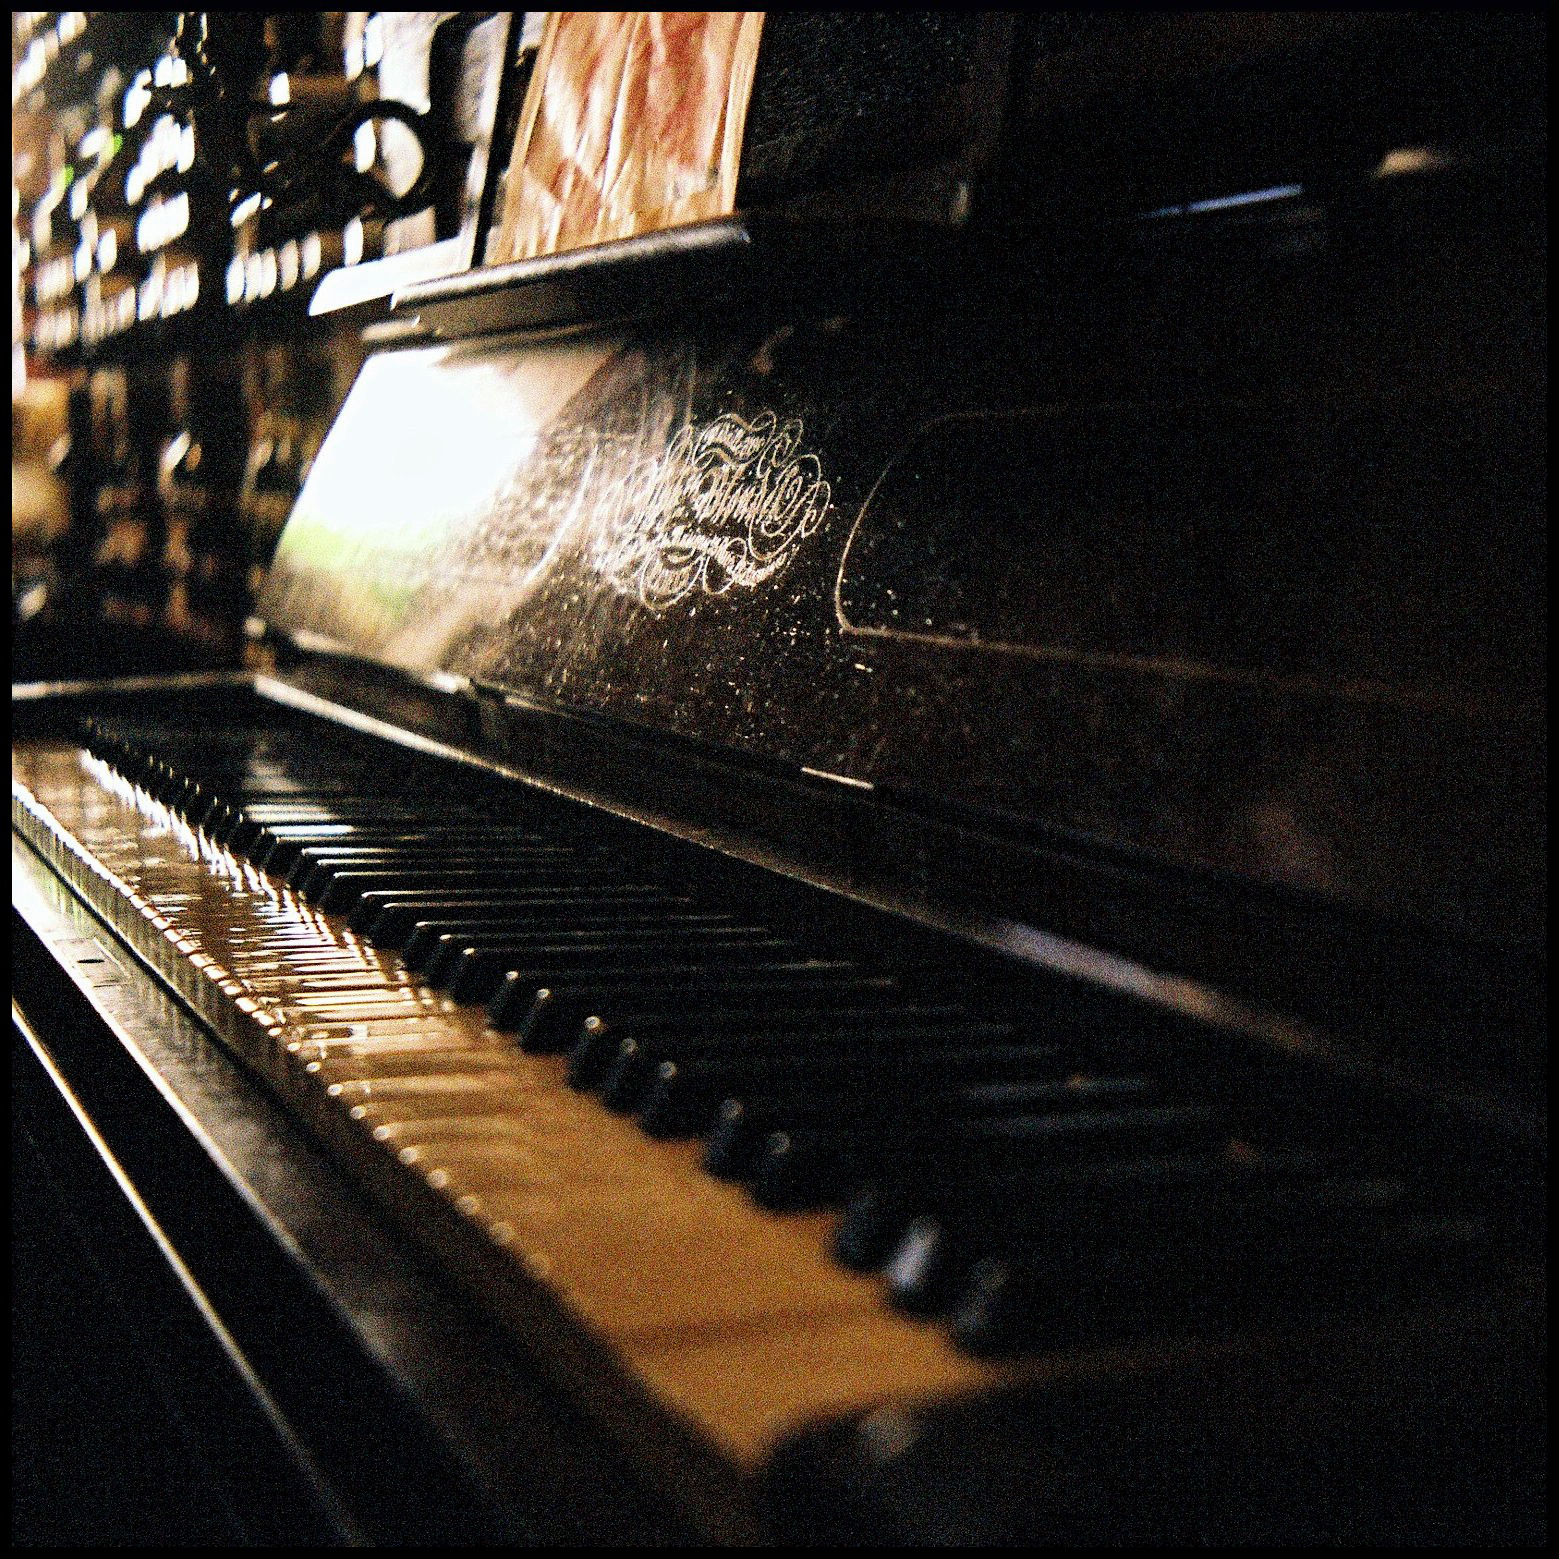 a close up of an piano in dark colors